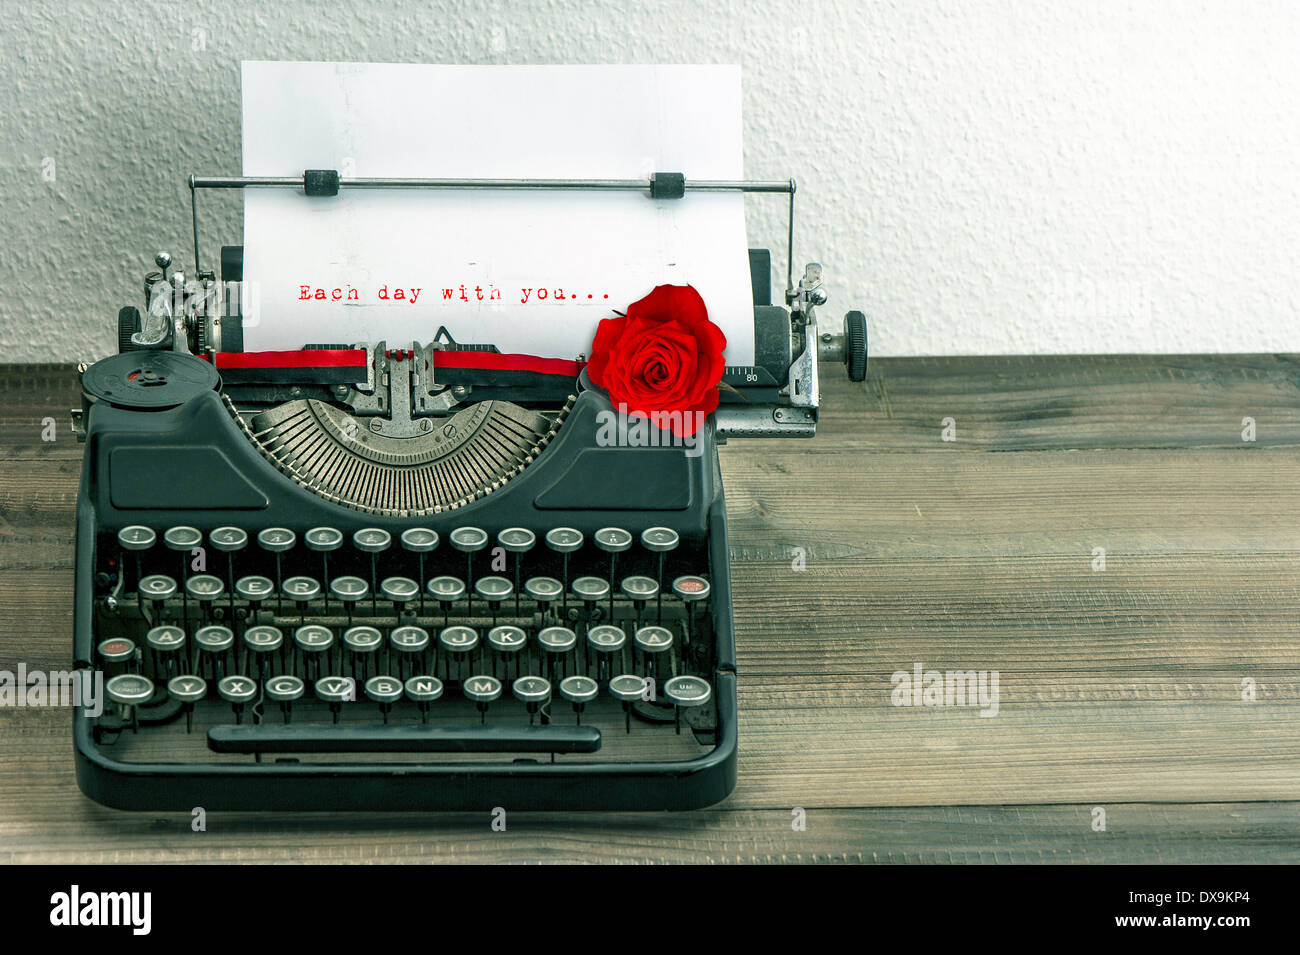 vintage typewriter with love letter and red rose flower. sample text Each day with you... Stock Photo